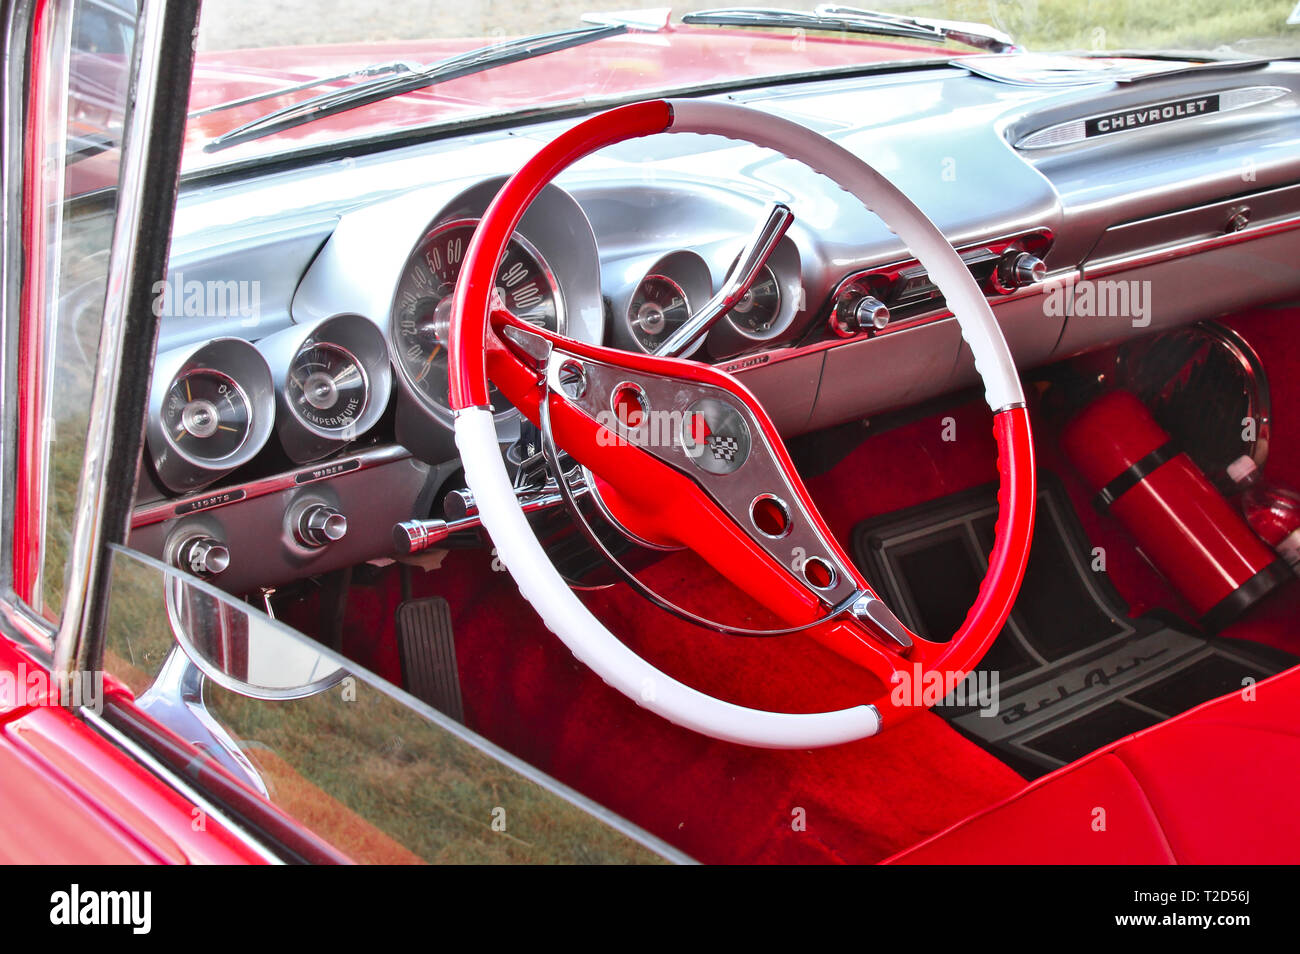 Red And White Interior Of A Restored Classic Car At Pick Nick 18 Classic Car Show In Forssa Finland 05 08 18 Forssa Finland Stock Photo Alamy